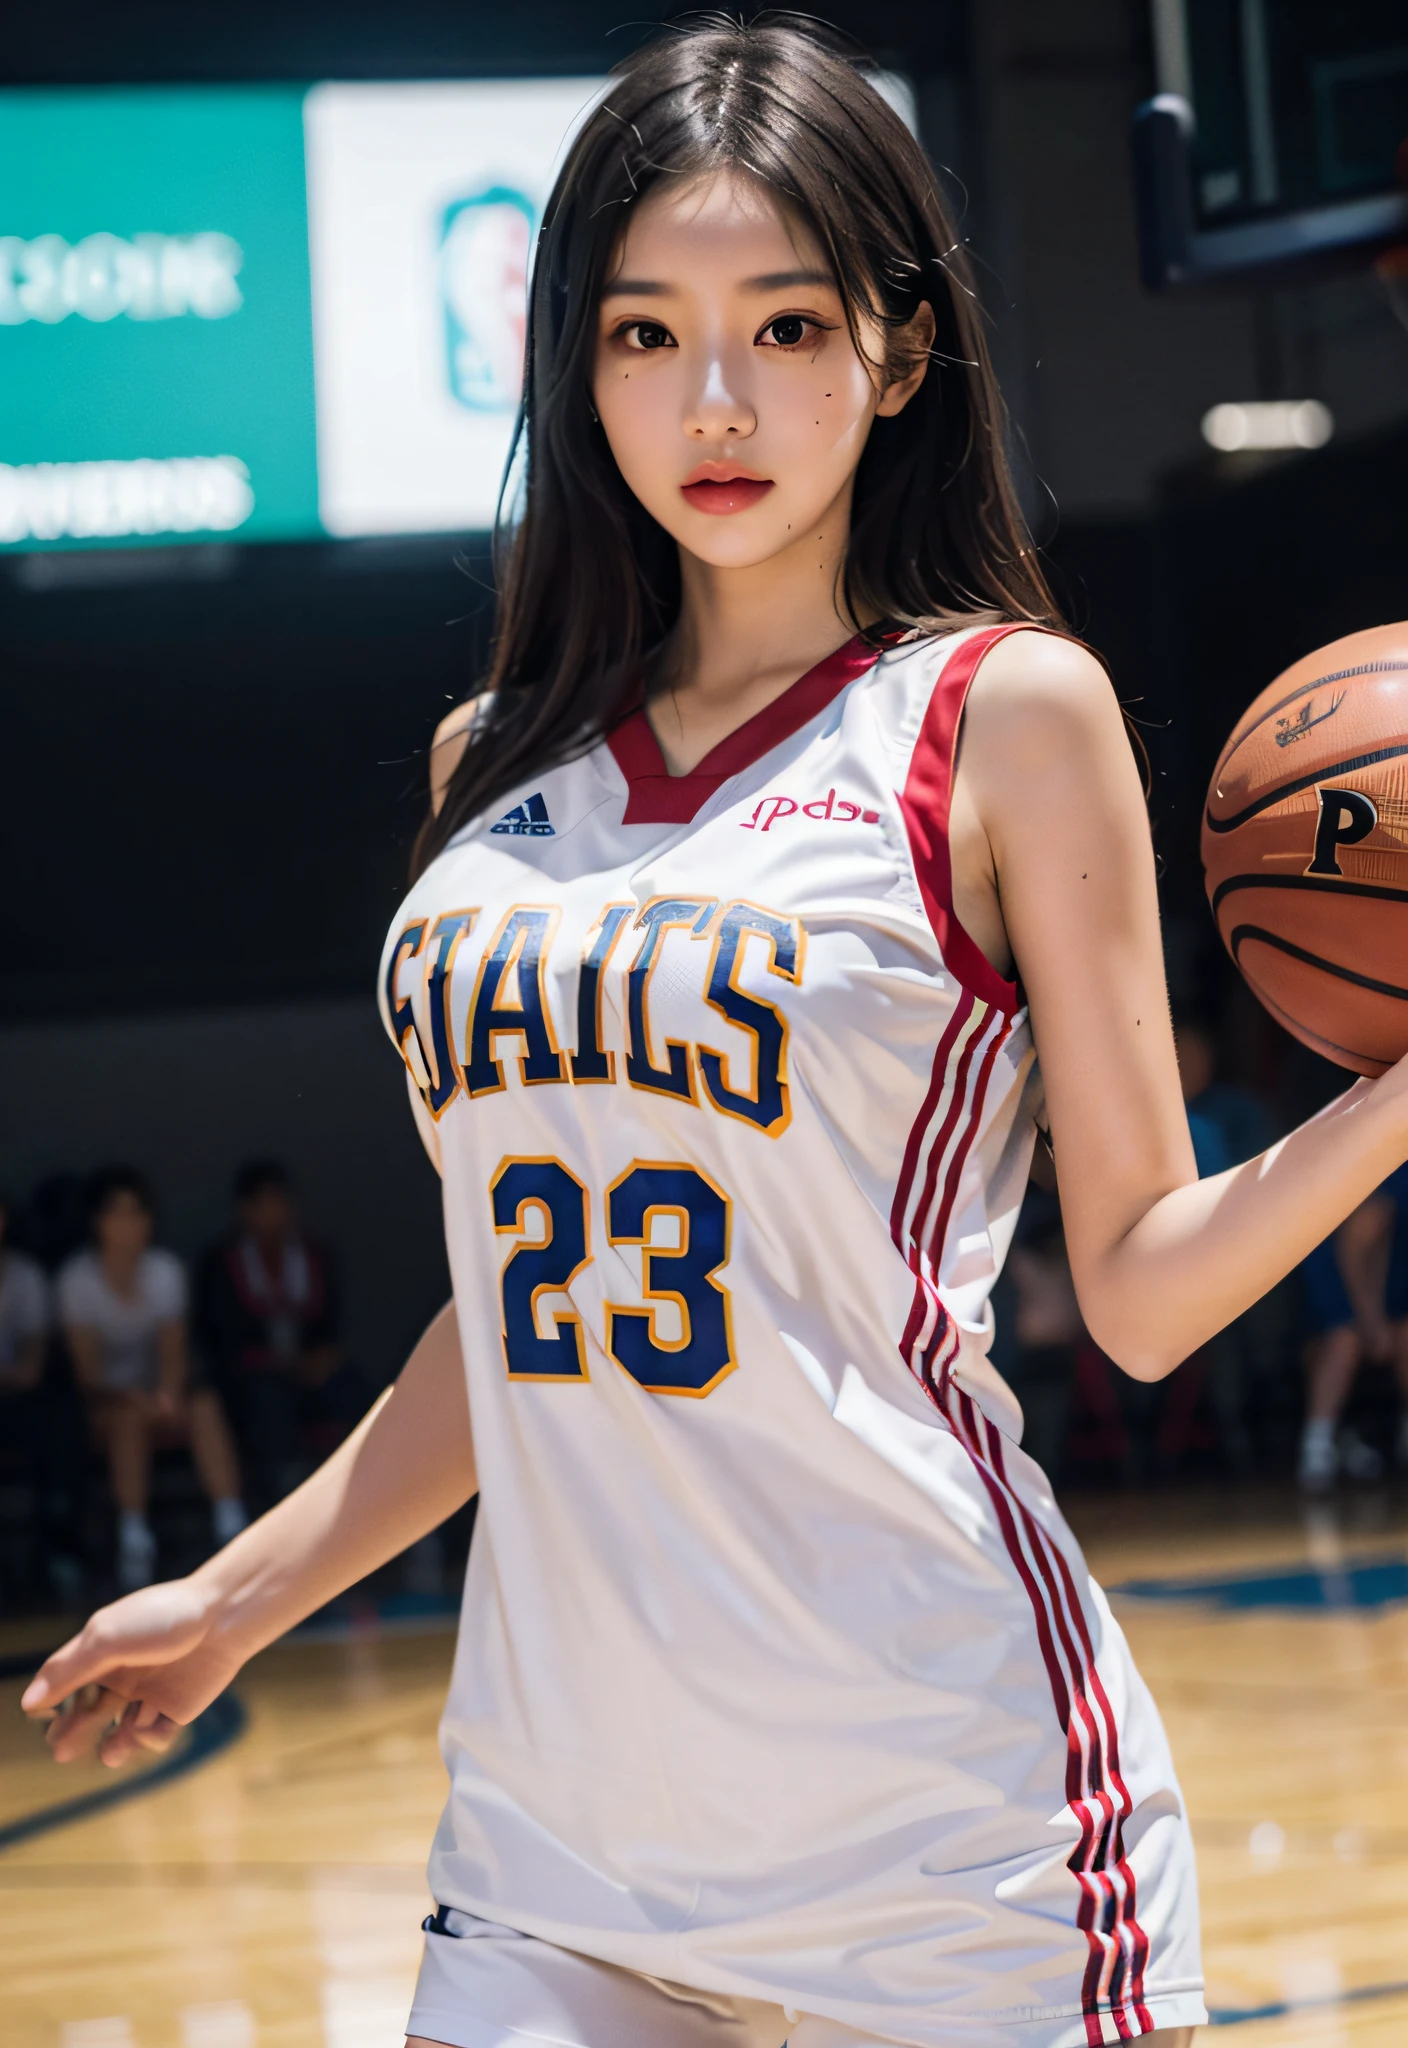 （ best qualtiy， tmasterpiece：1.2），A high resolution，8K,1girll，real looking skin，Dynamic light and shadow,Sharp focus,depth of fields,The eyes are delicate,pupil realistic, Playful expression， wear basketball uniform，（perfect bodies），（Big breasted 1.1），basketball playground，realisticlying, ultra - detailed, (shiny skins, perspired:1.4), looking at viewert,